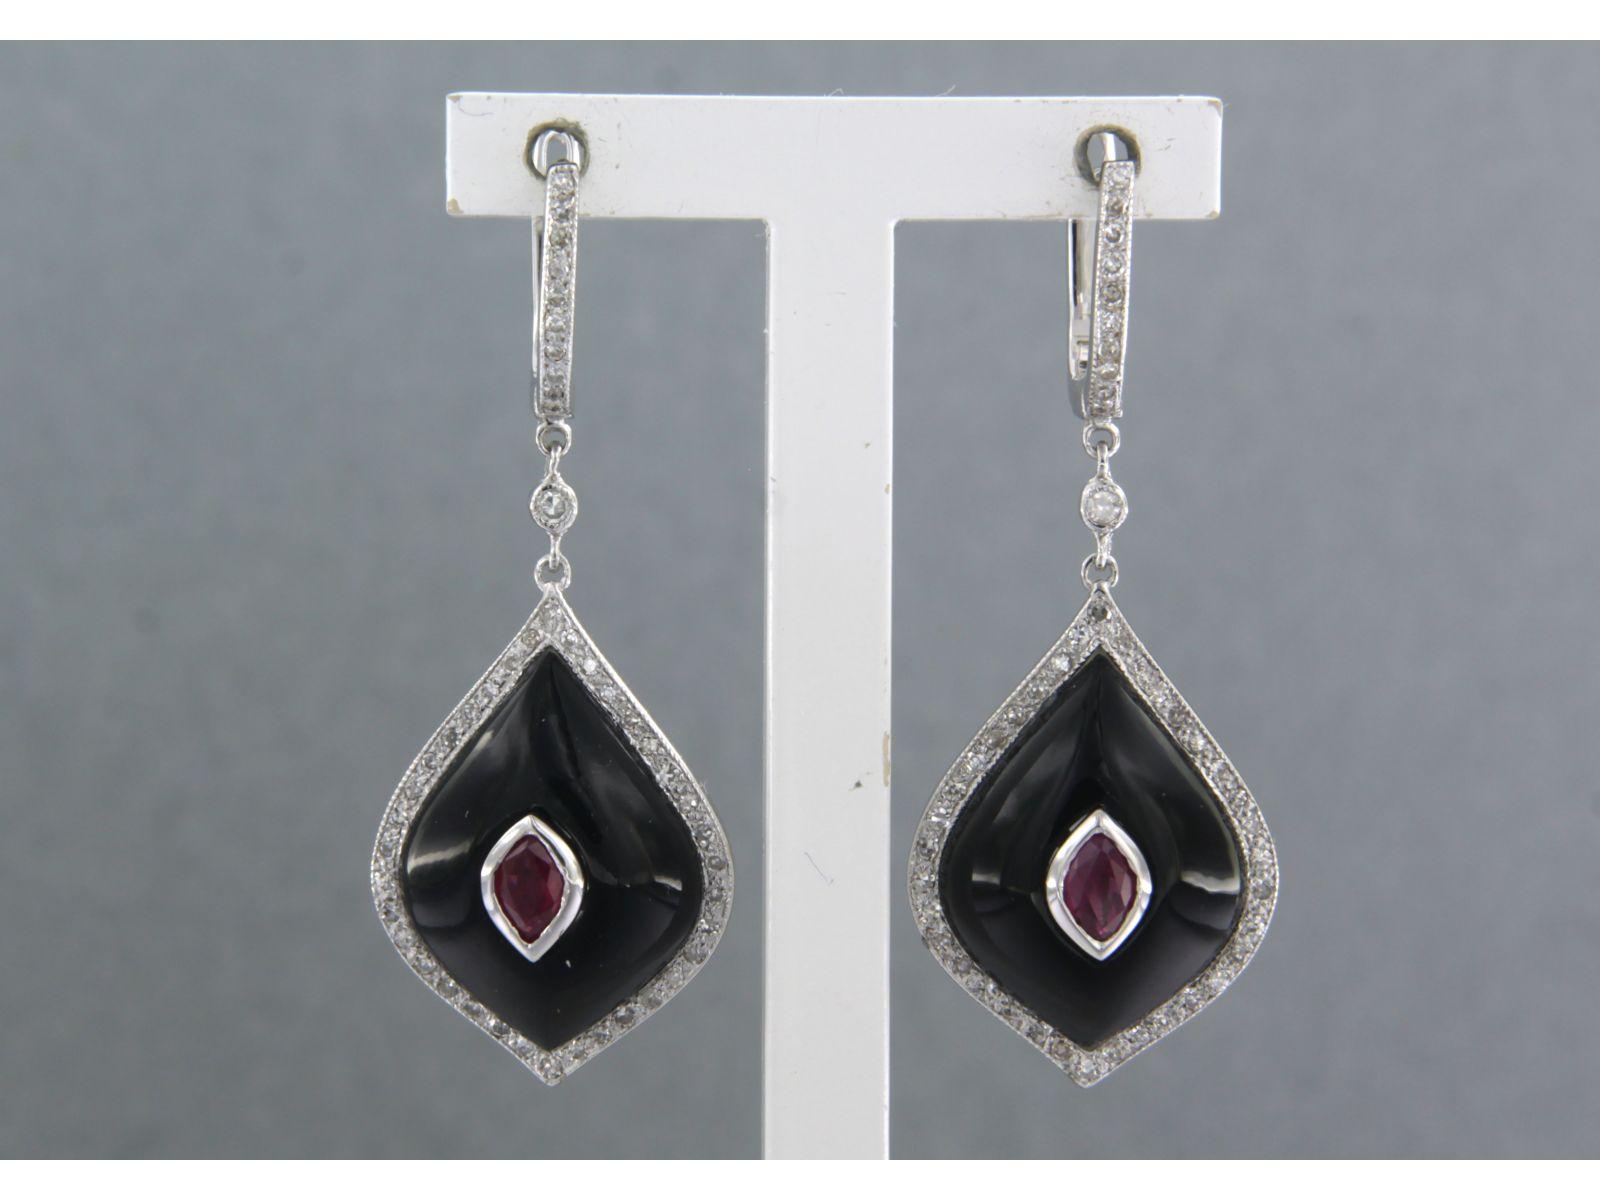 14k white gold earrings set with sapphire, onyx and single cut diamonds. 0.40ct - F/G - VS/SI

detailed description:

the size of the earring is 3.7 cm long by 1.4 cm wide

weight 5.9 grams

set with

- 2 x 1.4 cm x 1.2 cm drop shape cabuchon cut